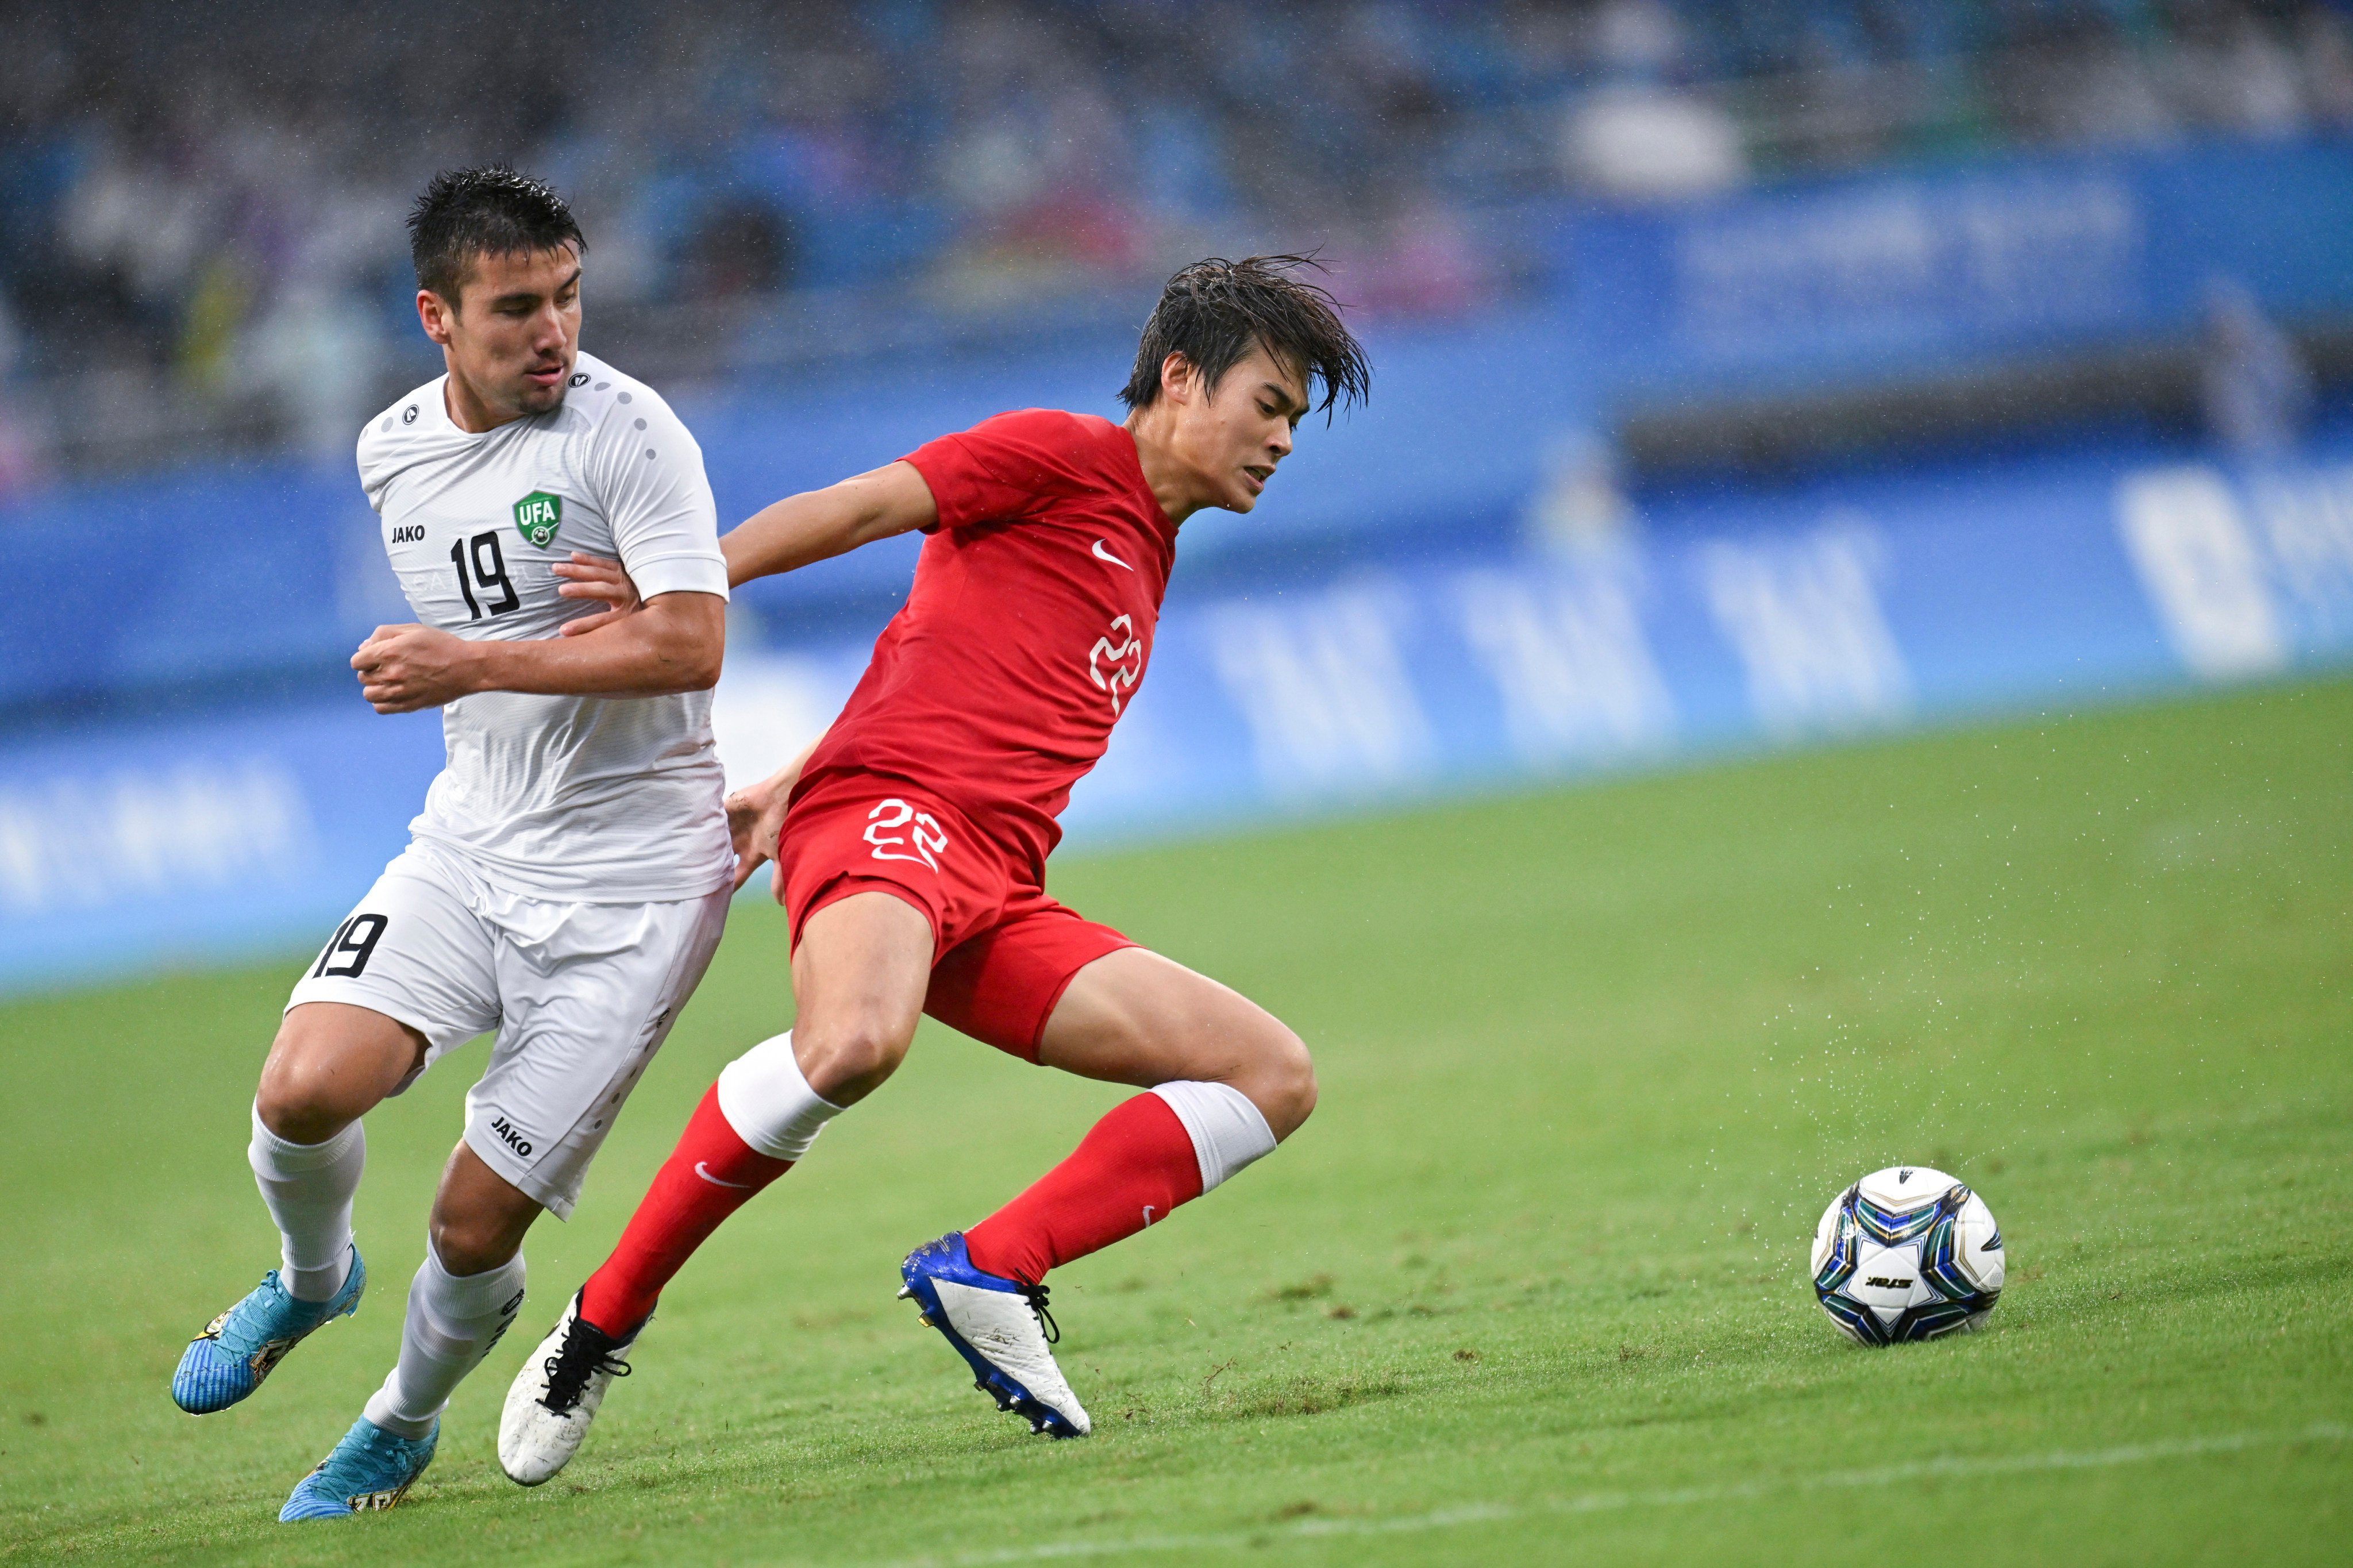 Ellison Tsang is currently unable to play football in England because of eligibility issues. Photo: Xinhua